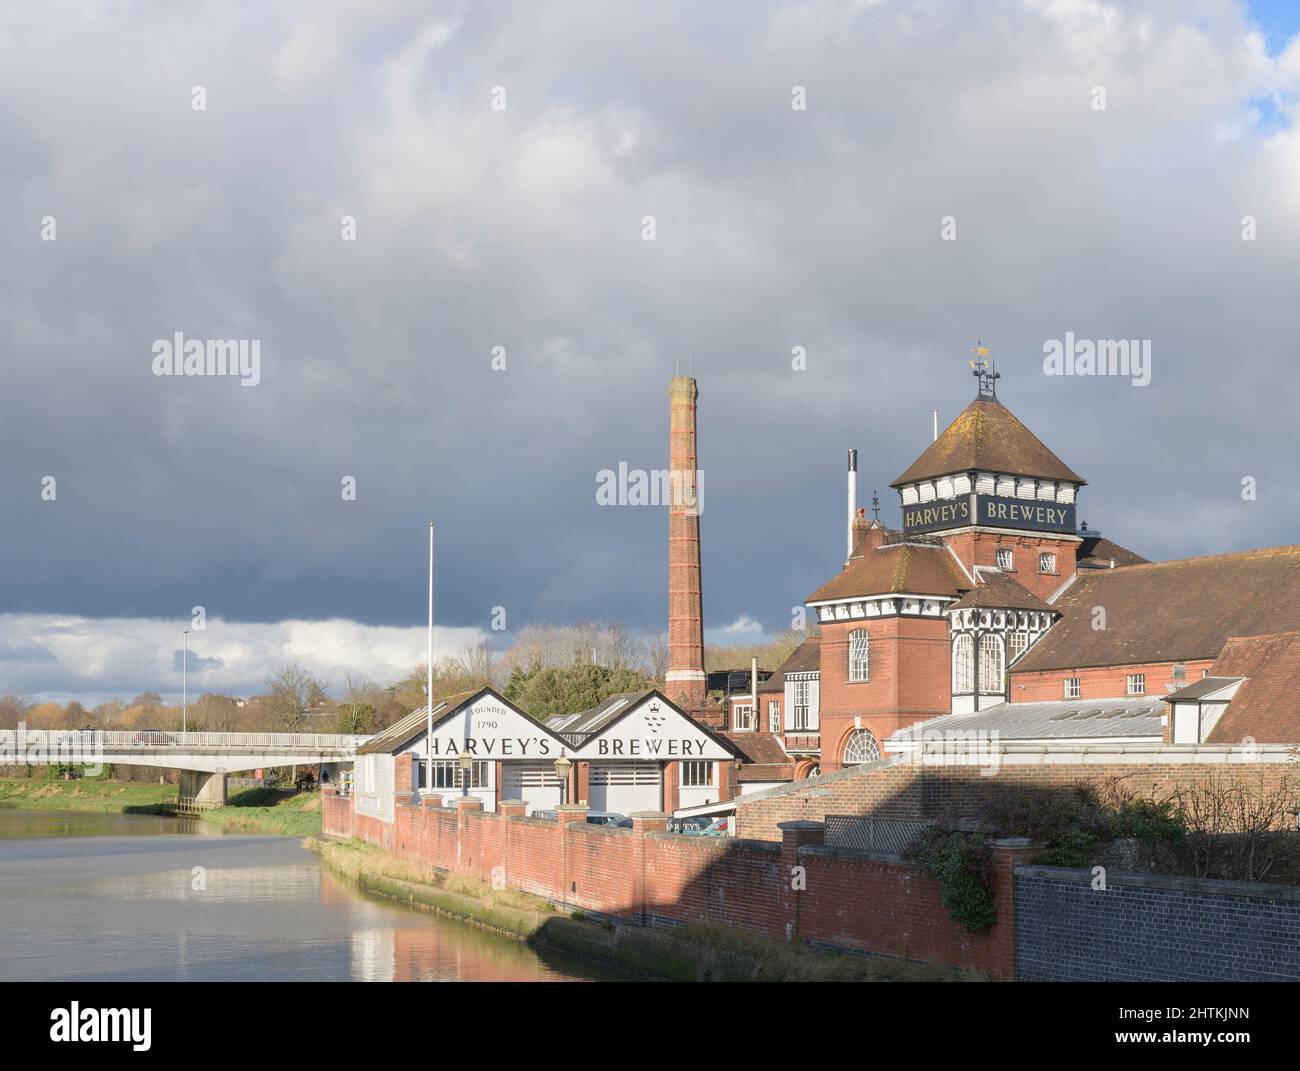 Harvey's Brewery by the River Ouse Lewes East Sussex England UK Stock Photo